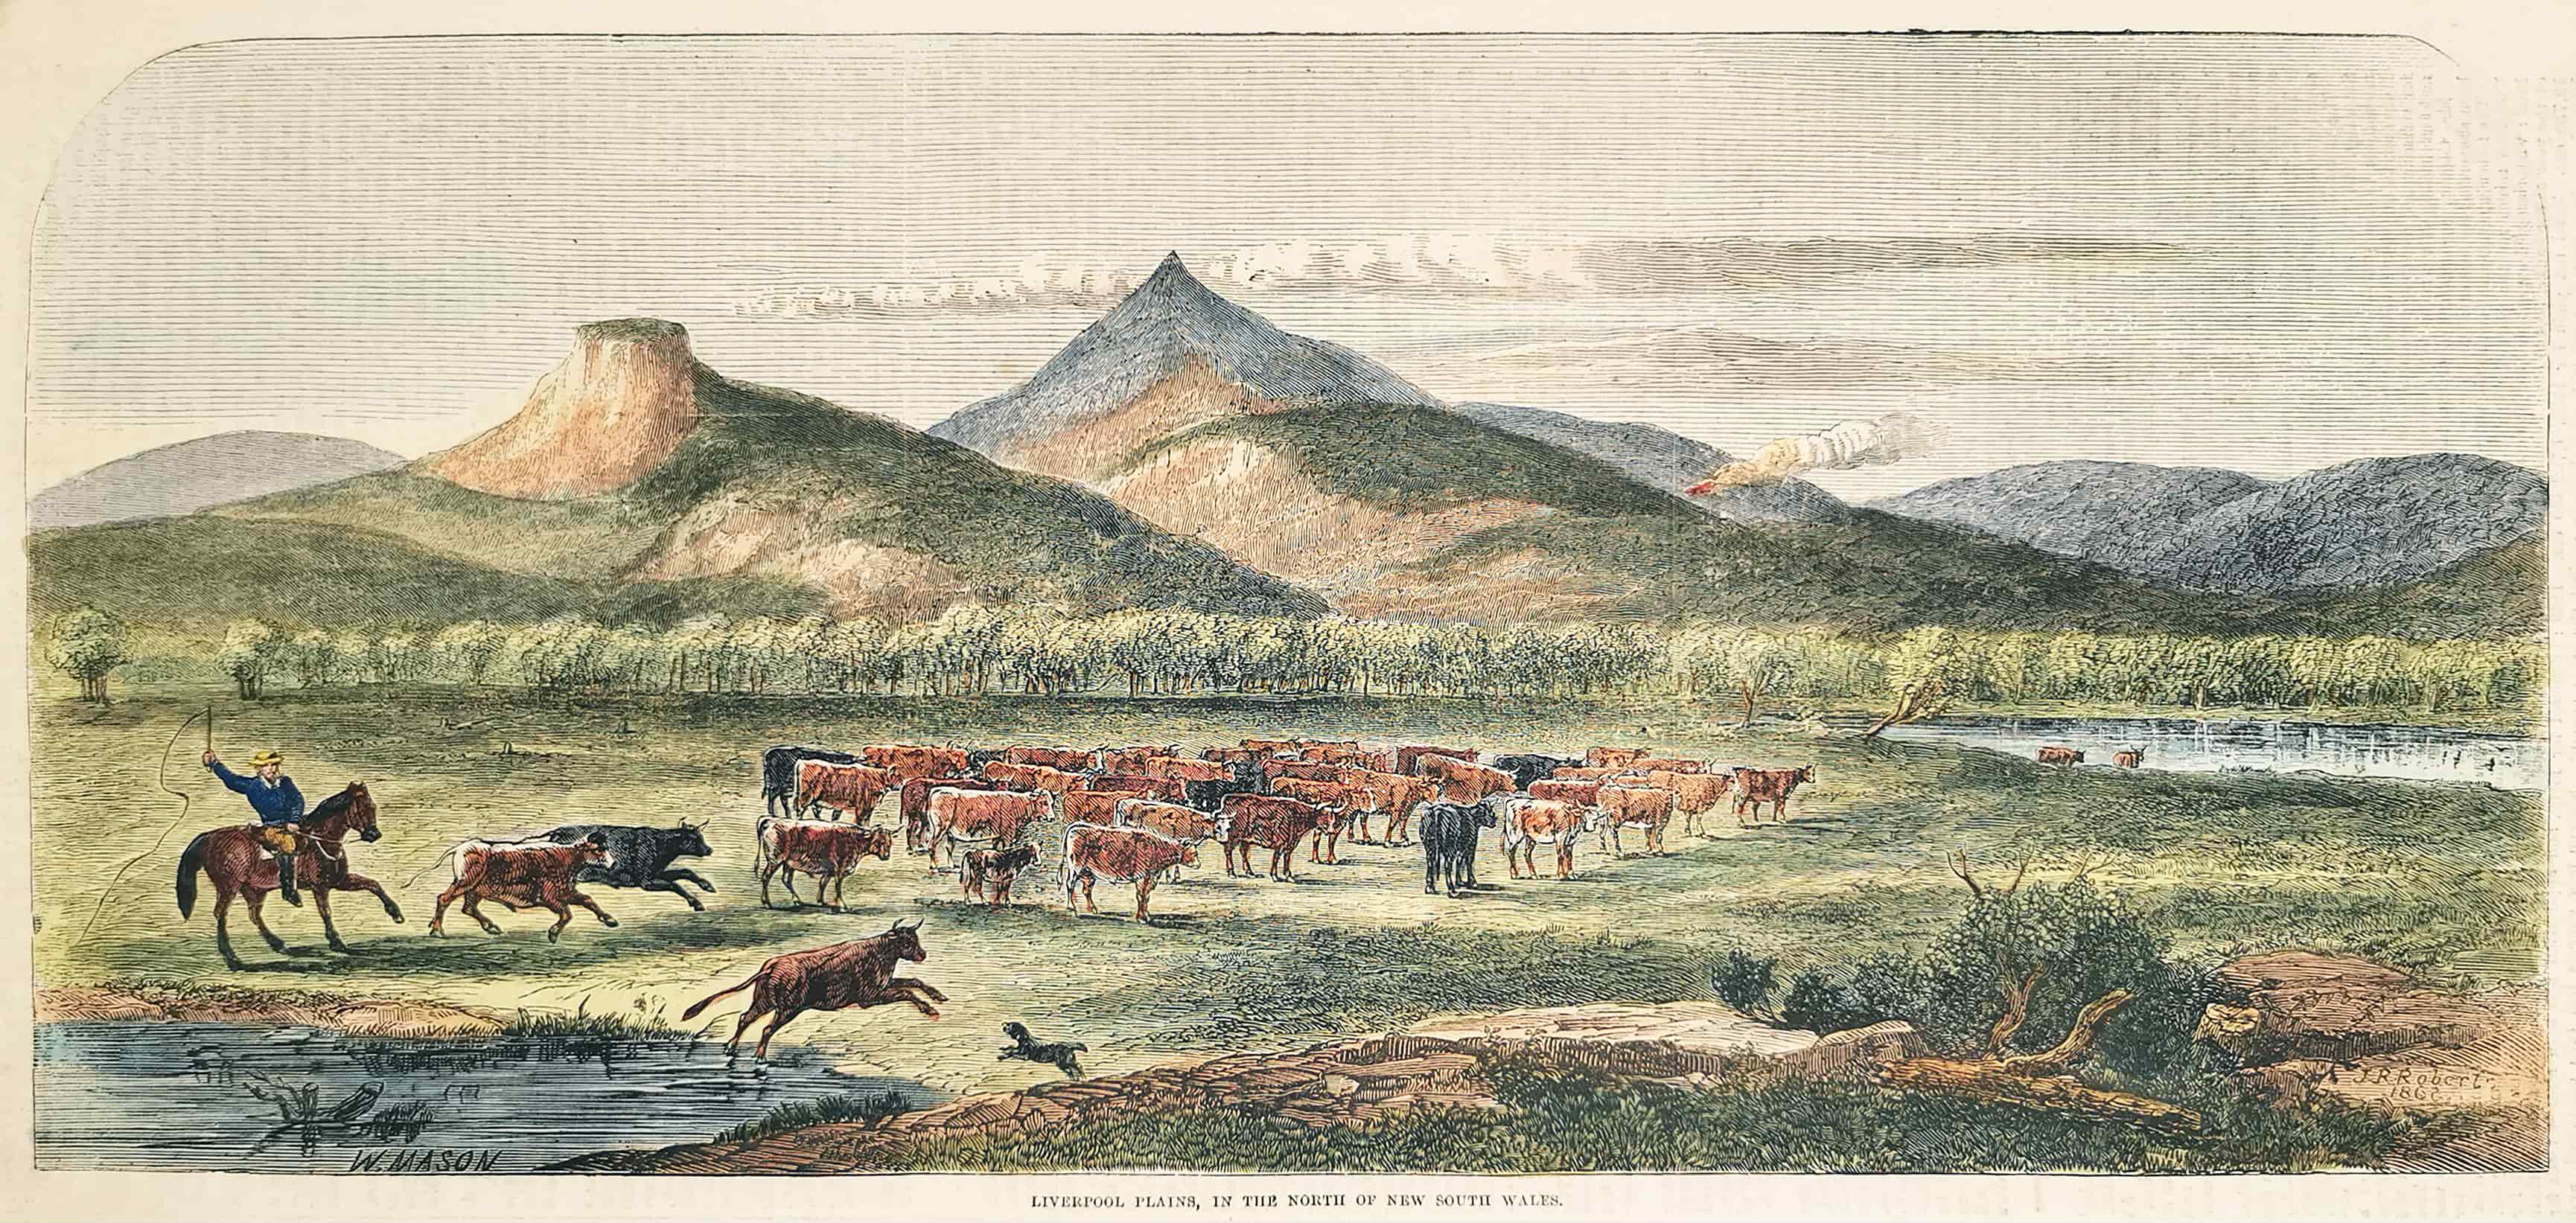 Liverpool Plains, in the North of New South Wales. - Antique View from 1866